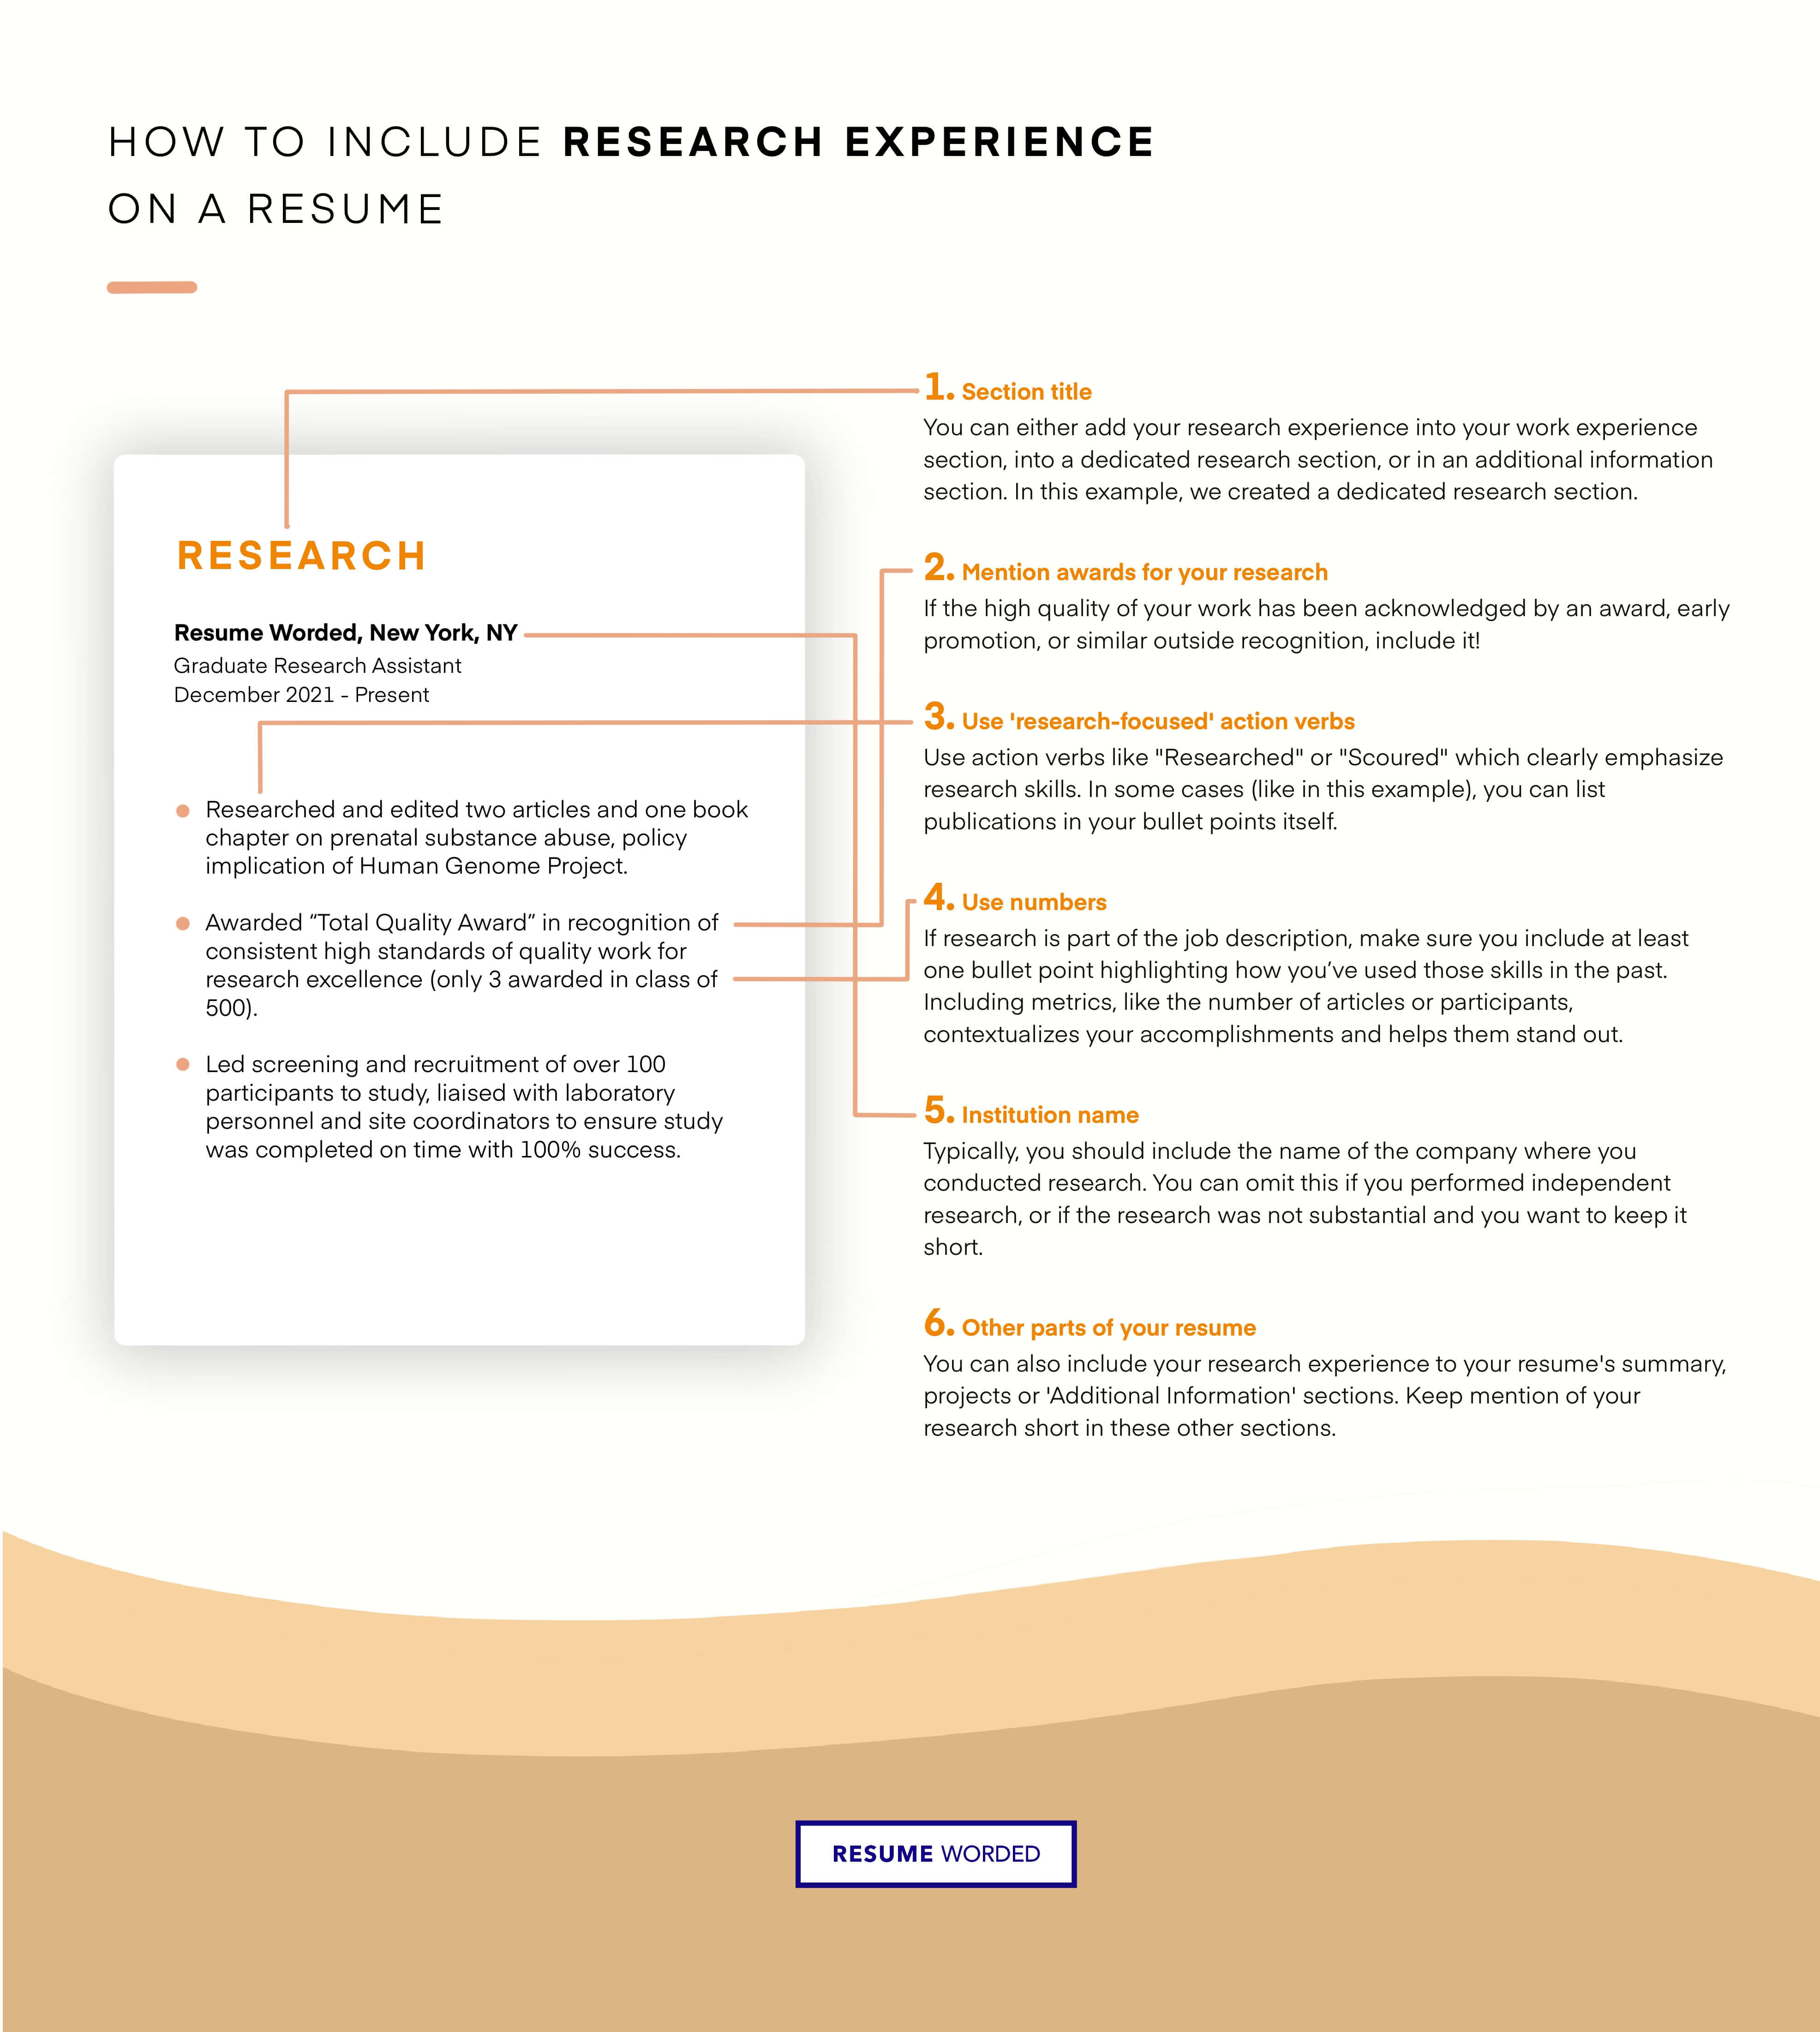 Highlight your market research skills. - Mergers & Acquisitions Specialist Resume